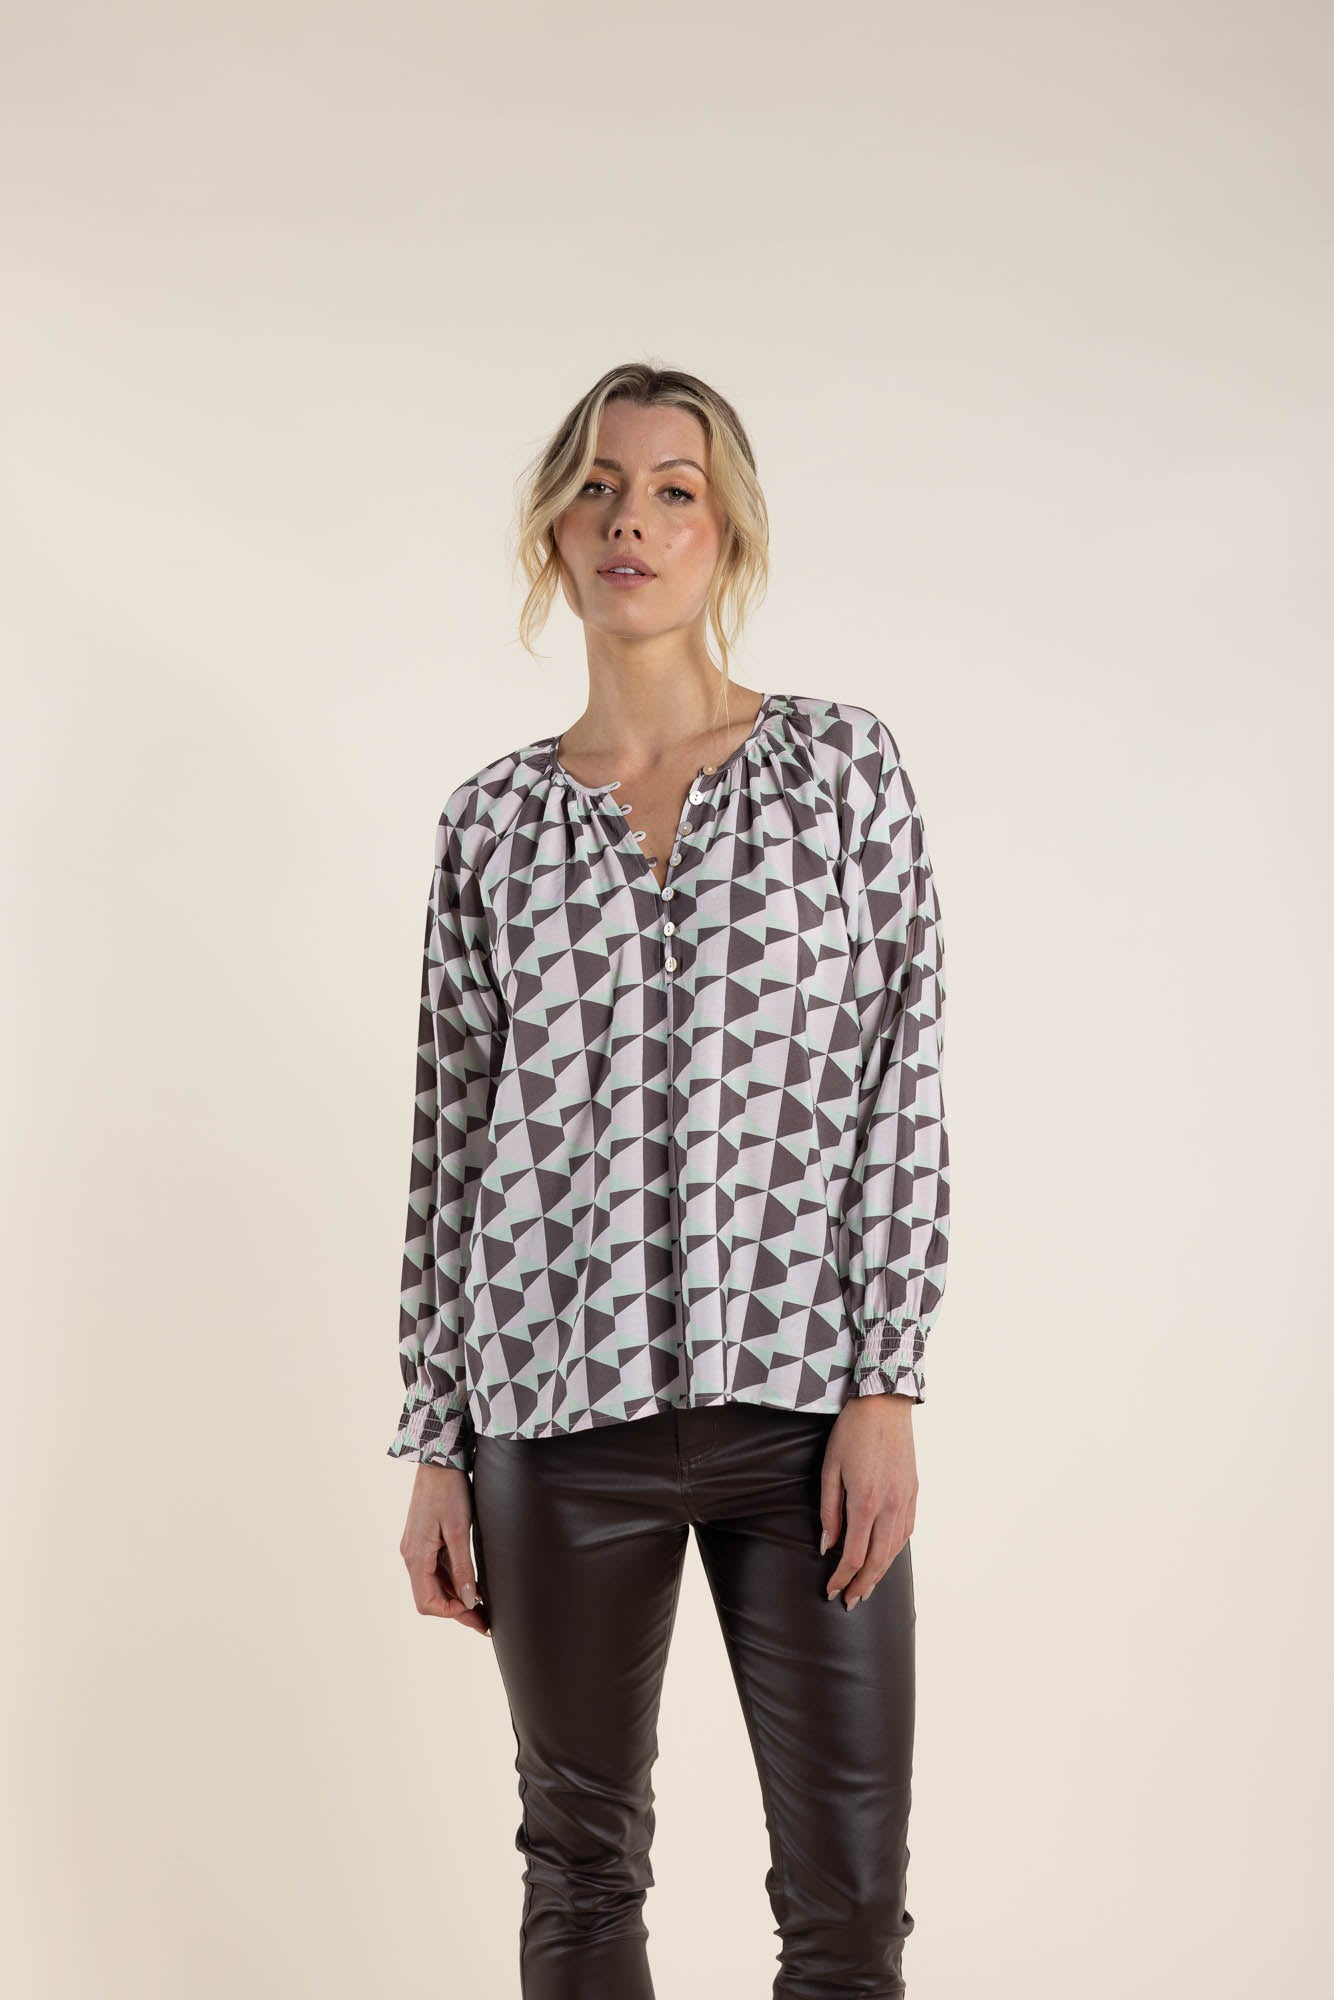 Two T's Triangle Print Top - Clove